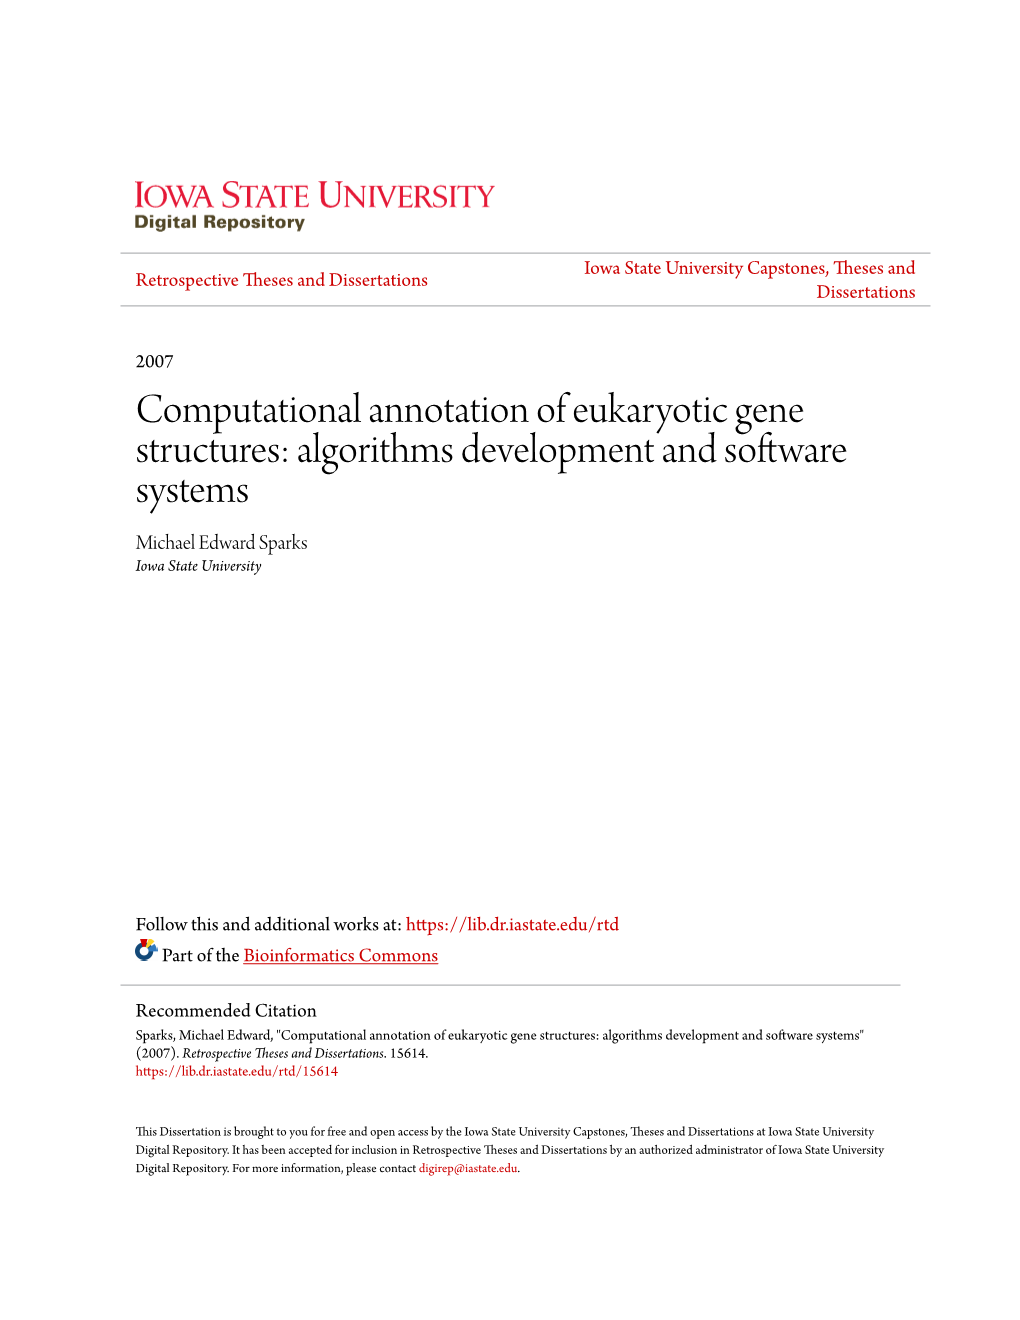 Computational Annotation of Eukaryotic Gene Structures: Algorithms Development and Software Systems Michael Edward Sparks Iowa State University